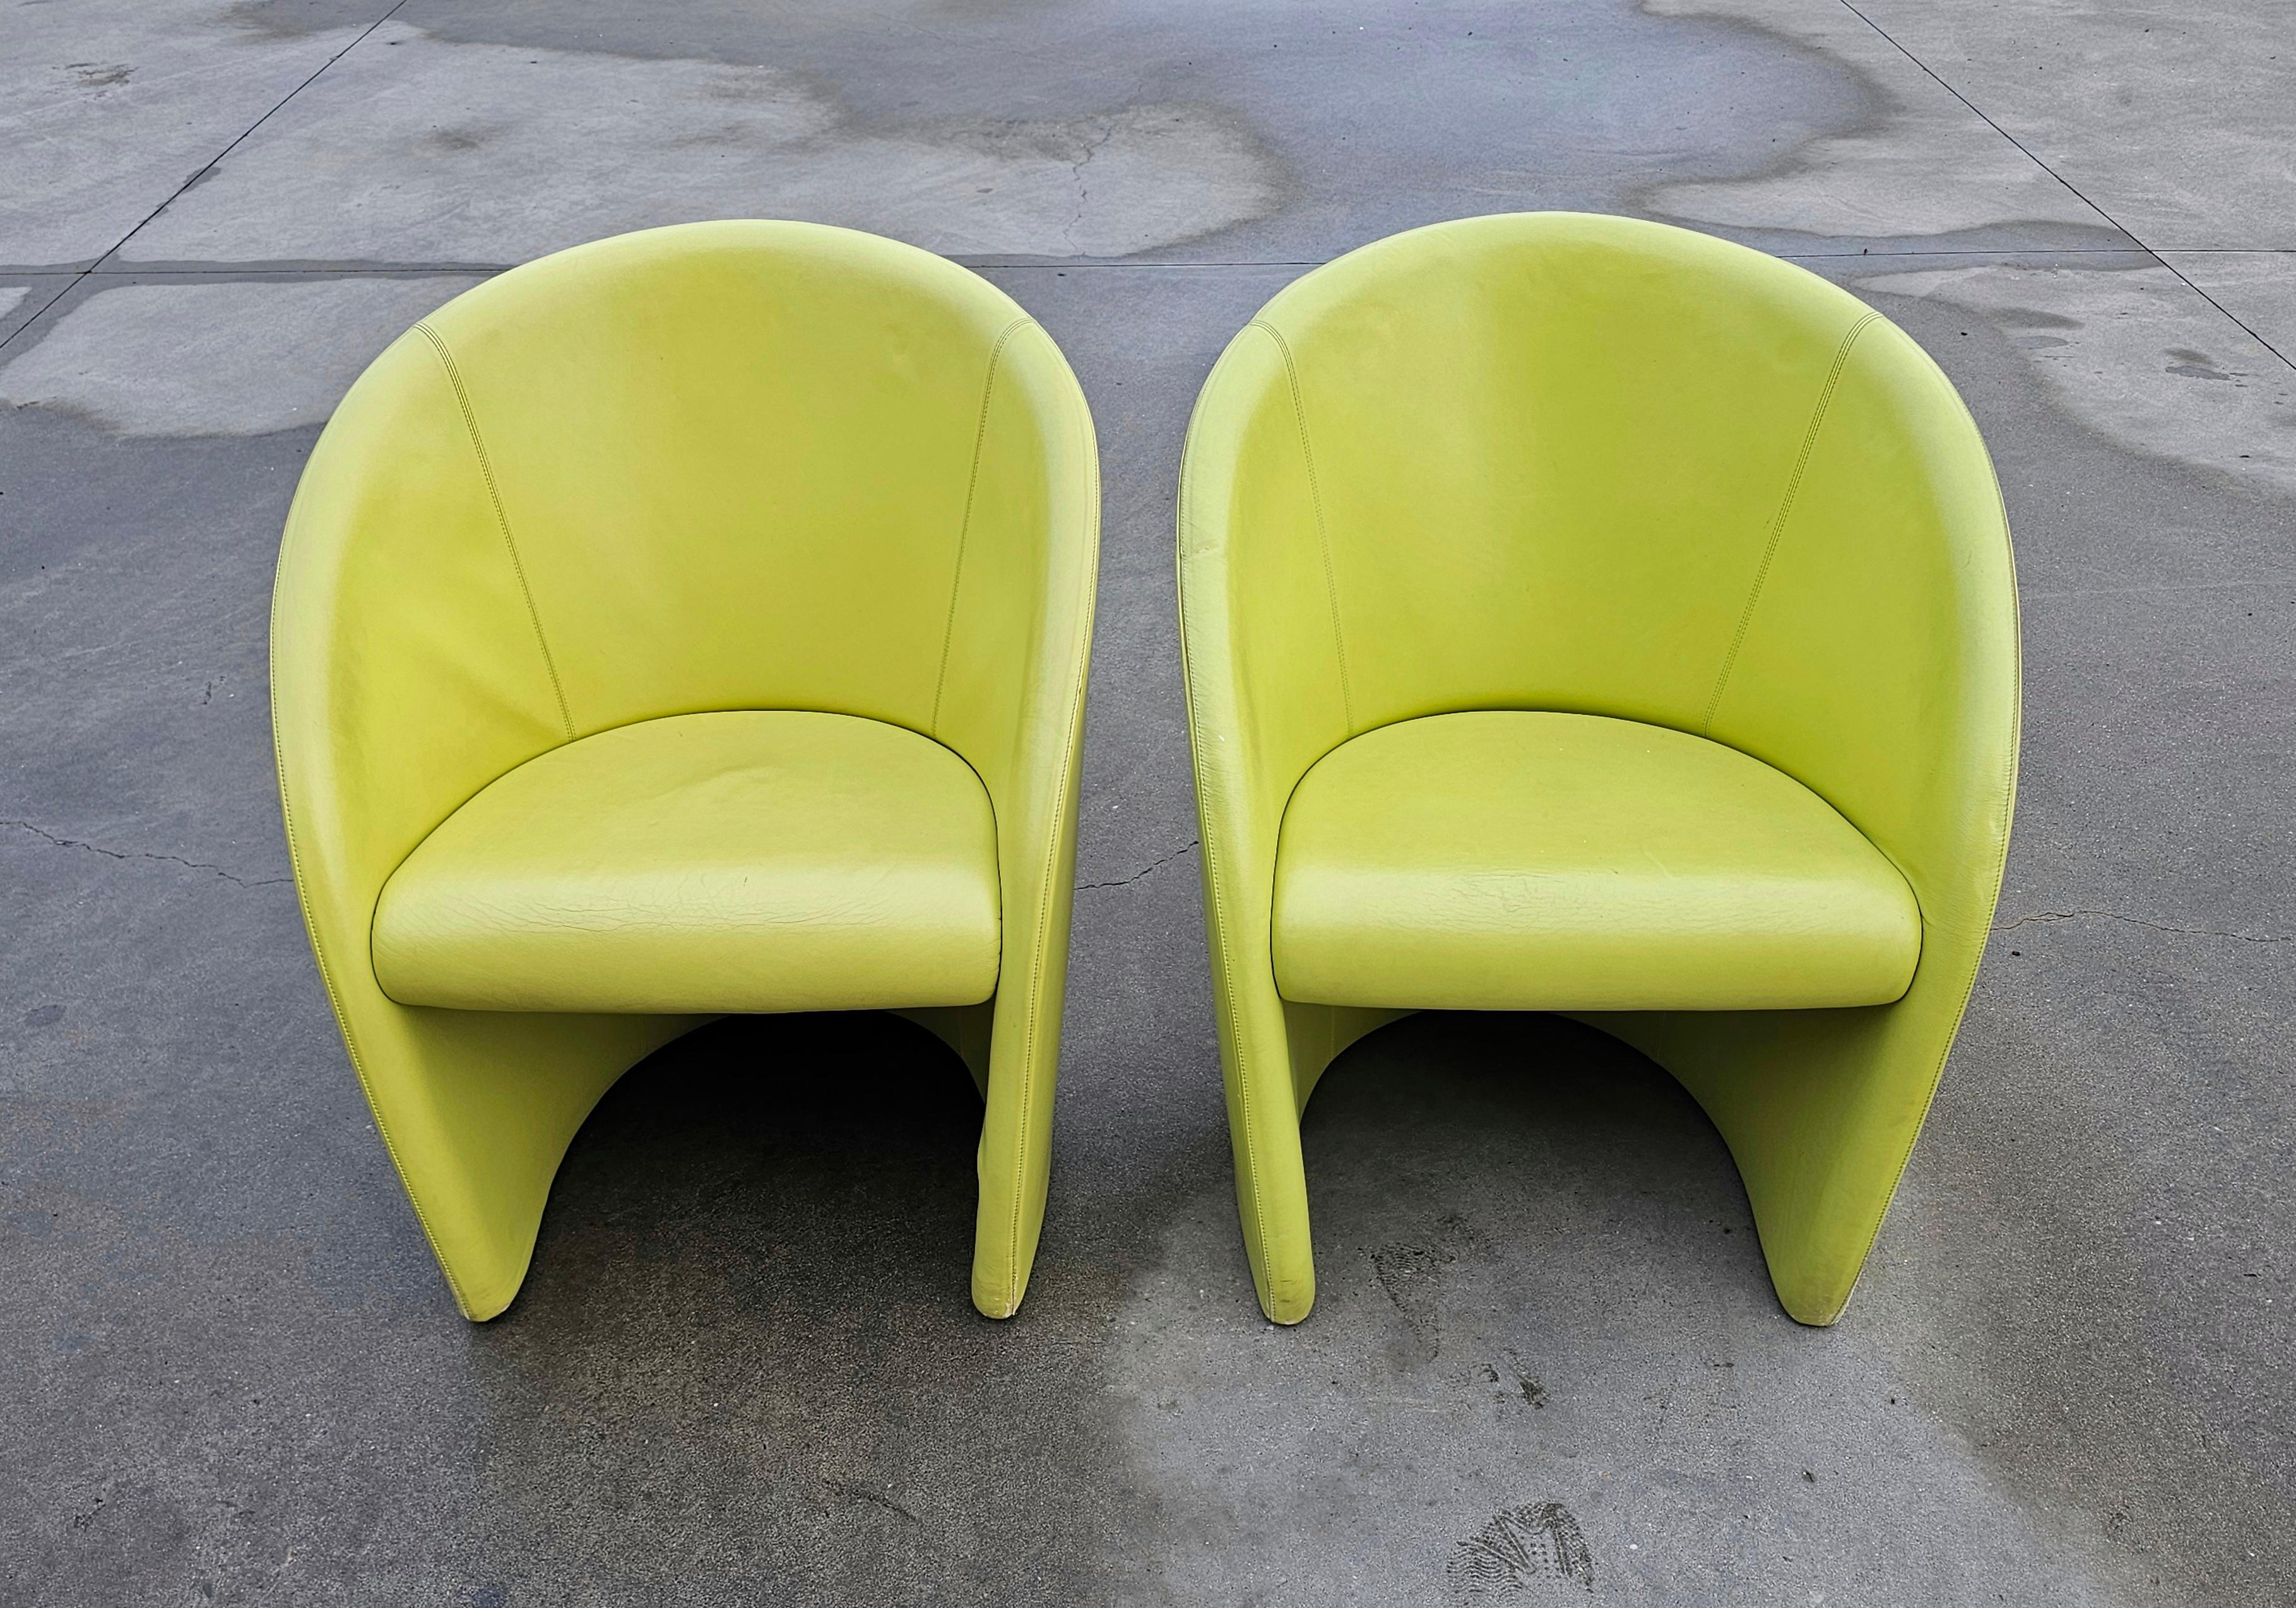 In this listing you will find 5 very rare postmodern club chairs model 